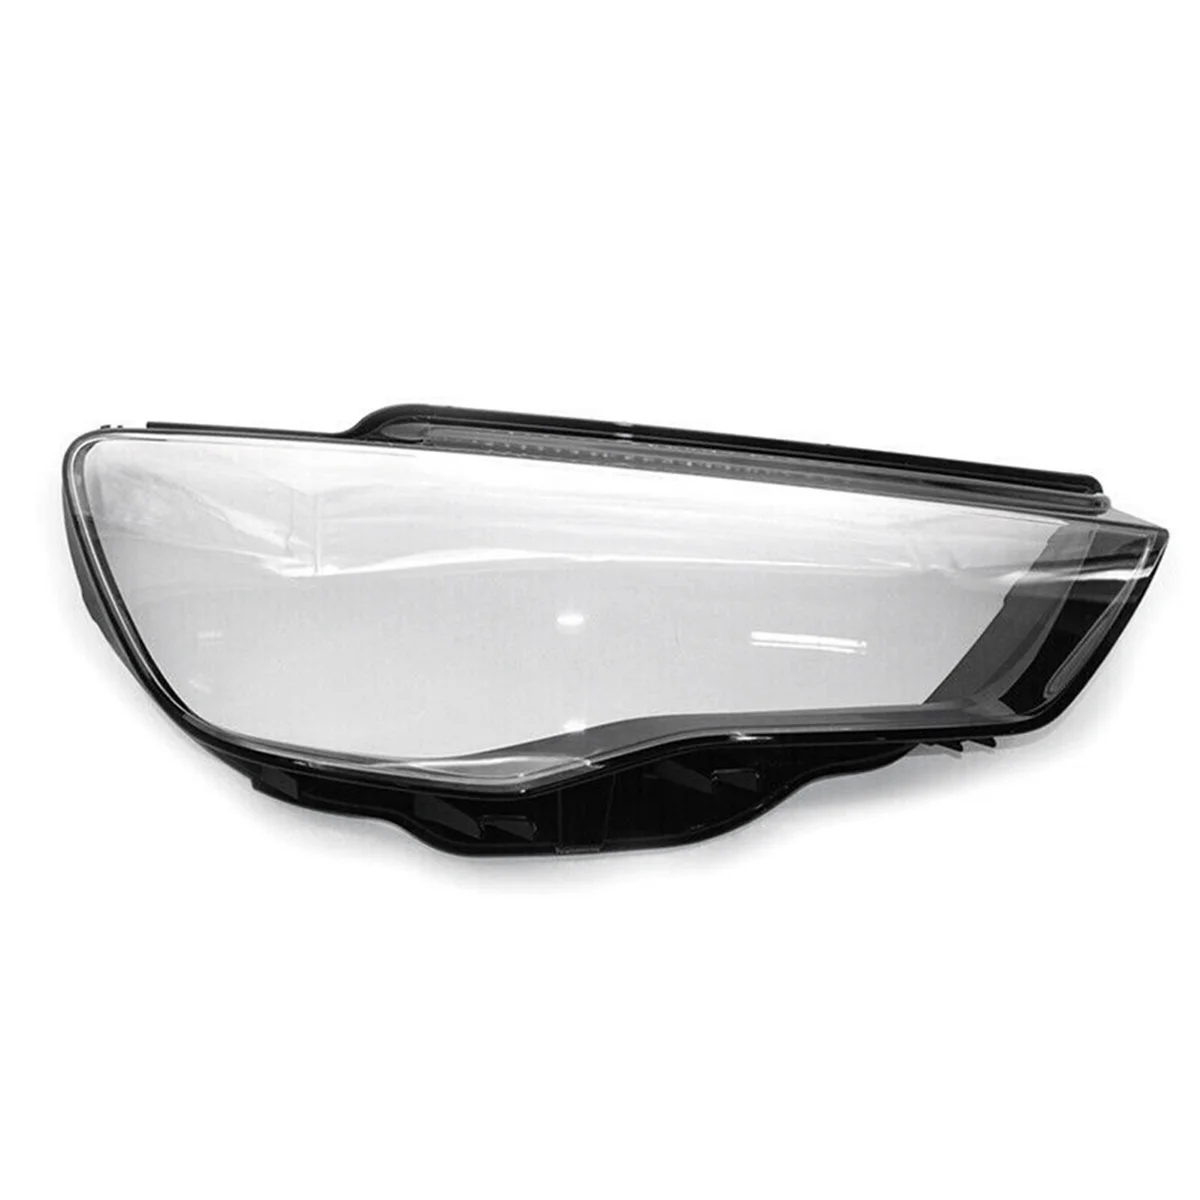 

Right Car Headlight Lens Cover Head Light Lamp Shade Shell Lens Lampshade for Audi A3 S3 2013 2014 2015 2016